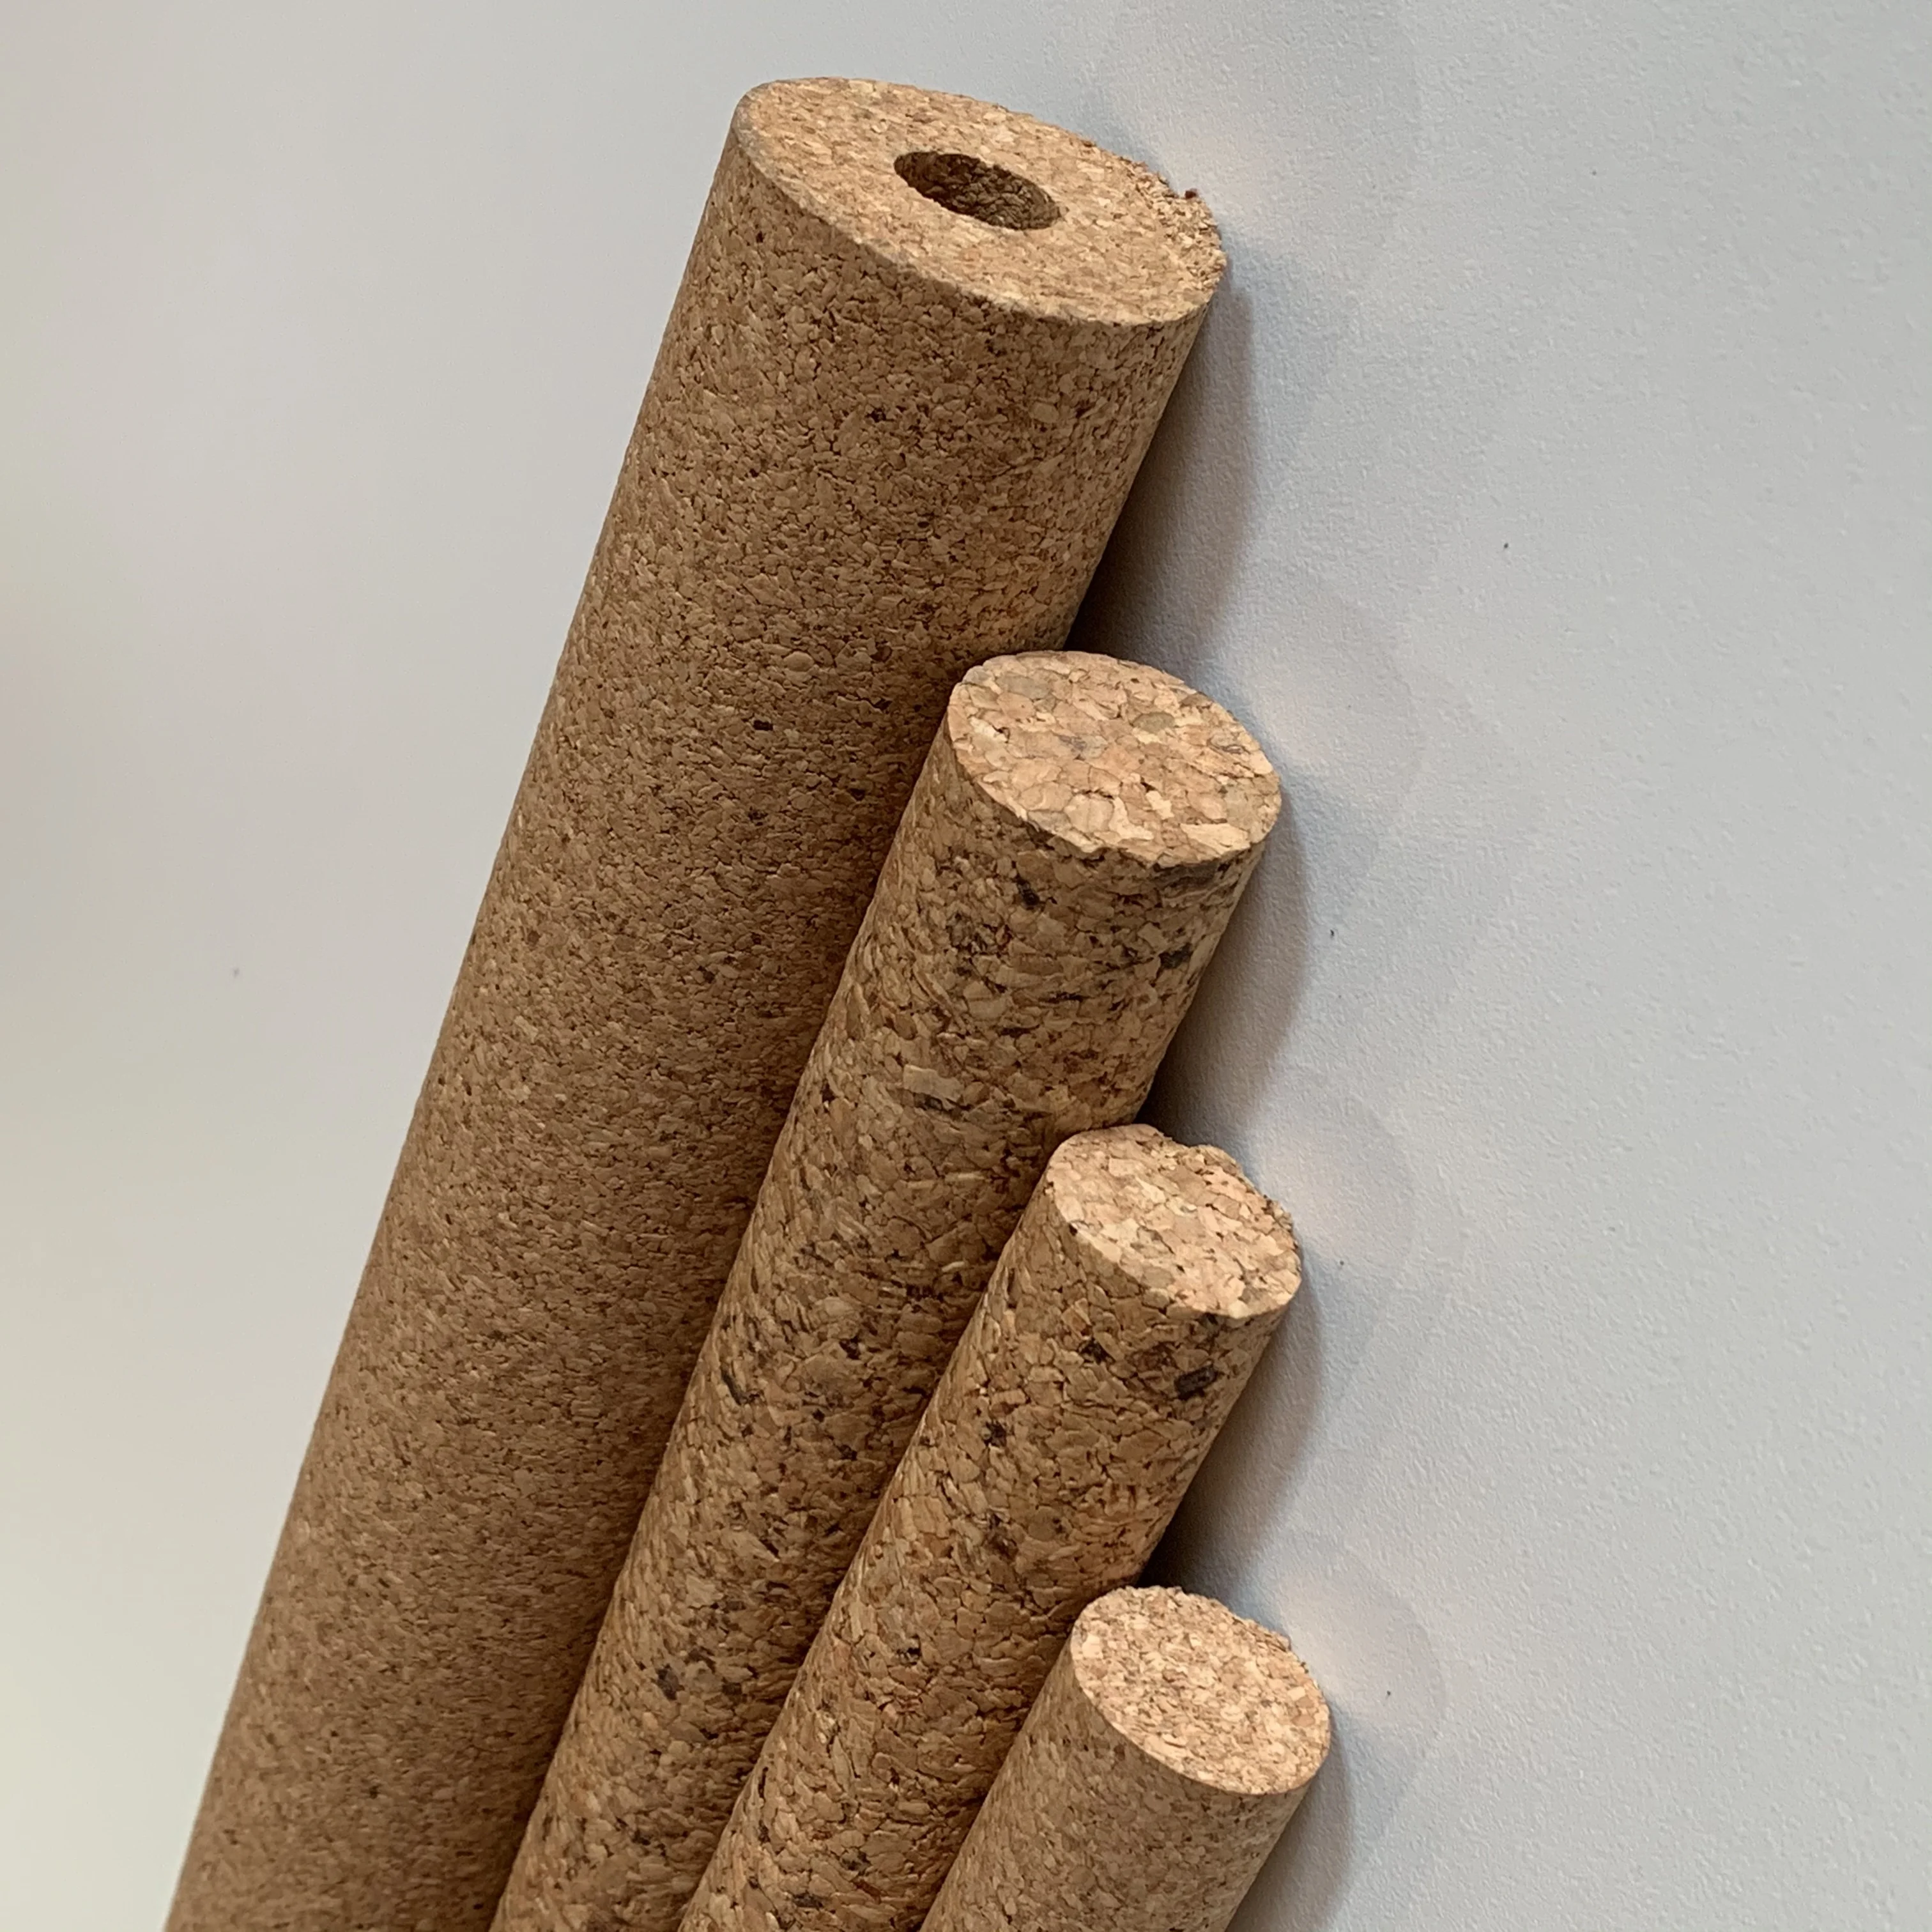 25mm dia agglomerated cork rod for wine cork stopper production